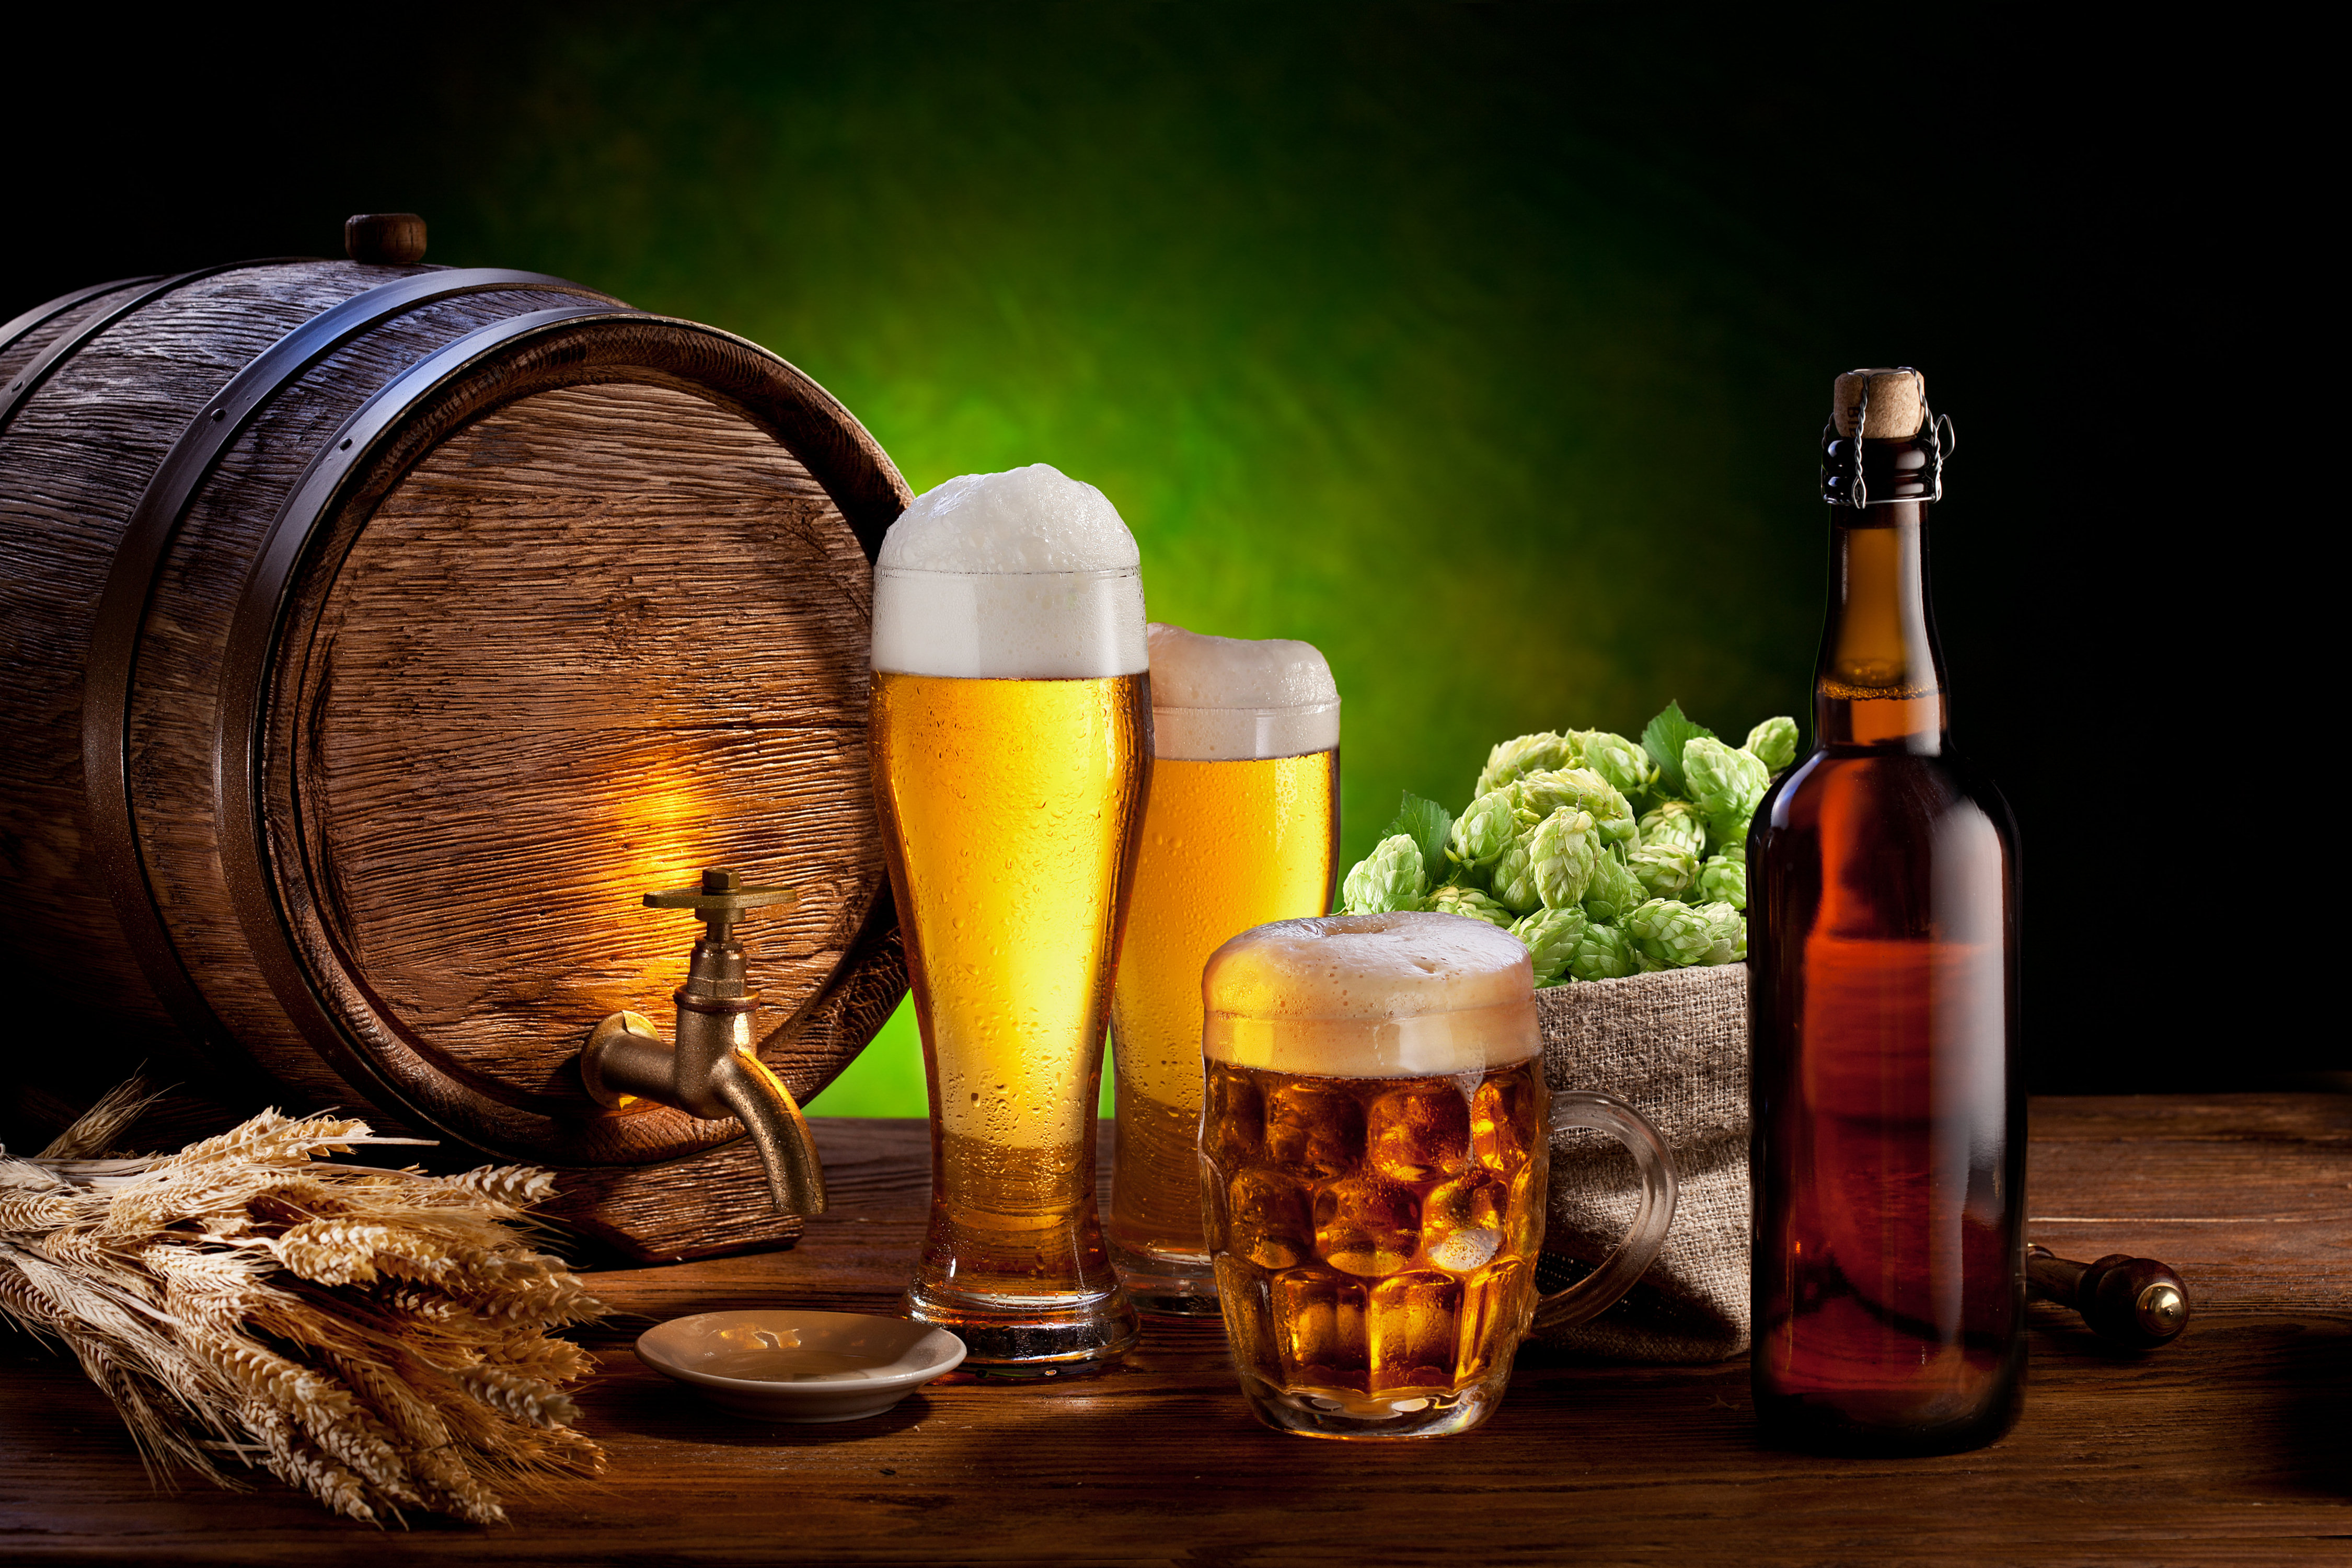 Beer 4k Ultra HD Wallpaper and Background Image | 4500x3000 | ID:276637